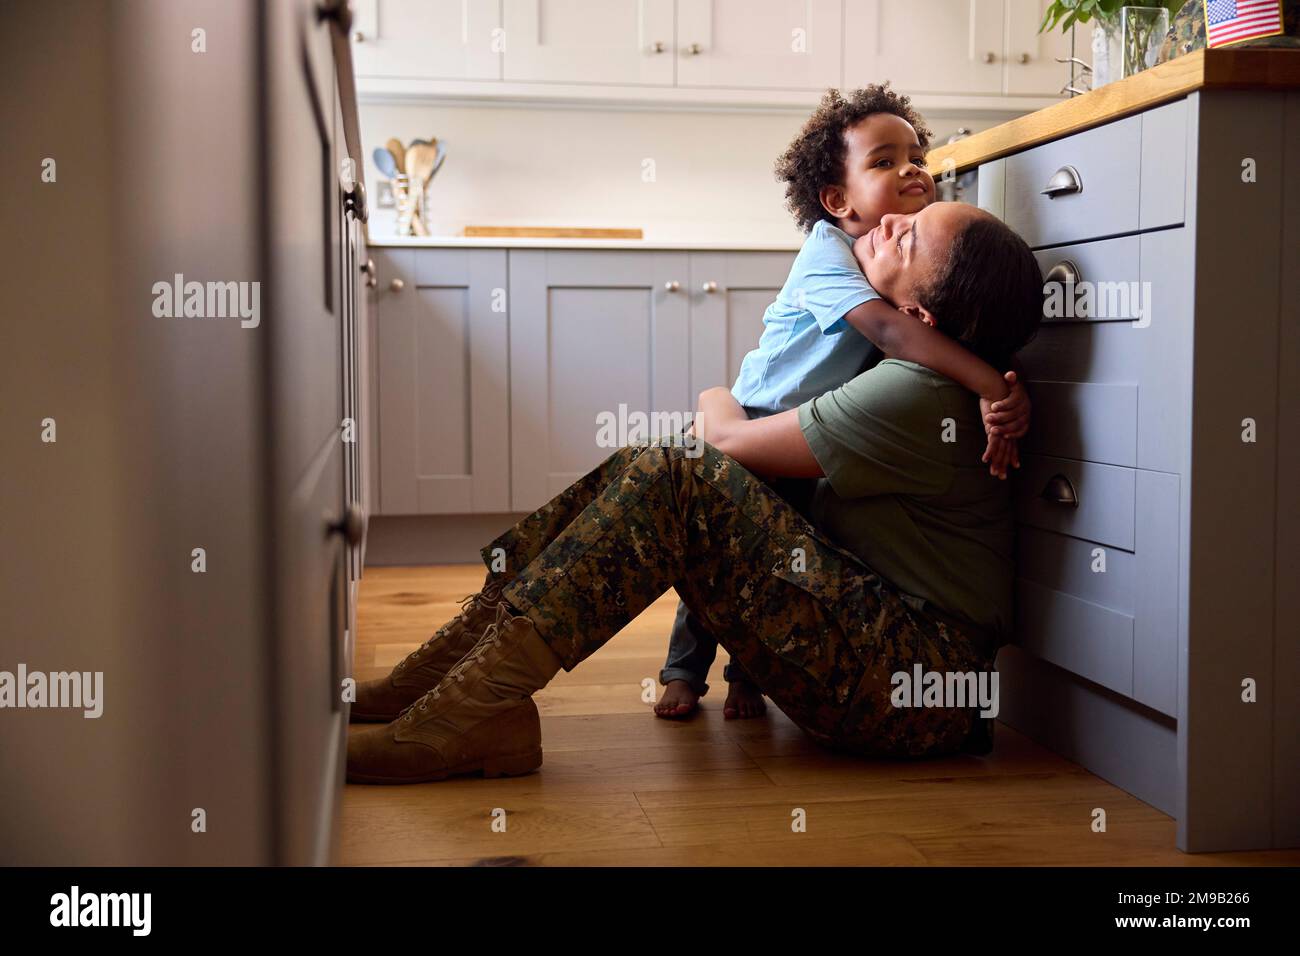 American Army Mother In Uniform Home On Leave Hugging Son Sitting On Floor In Family Kitchen Stock Photo